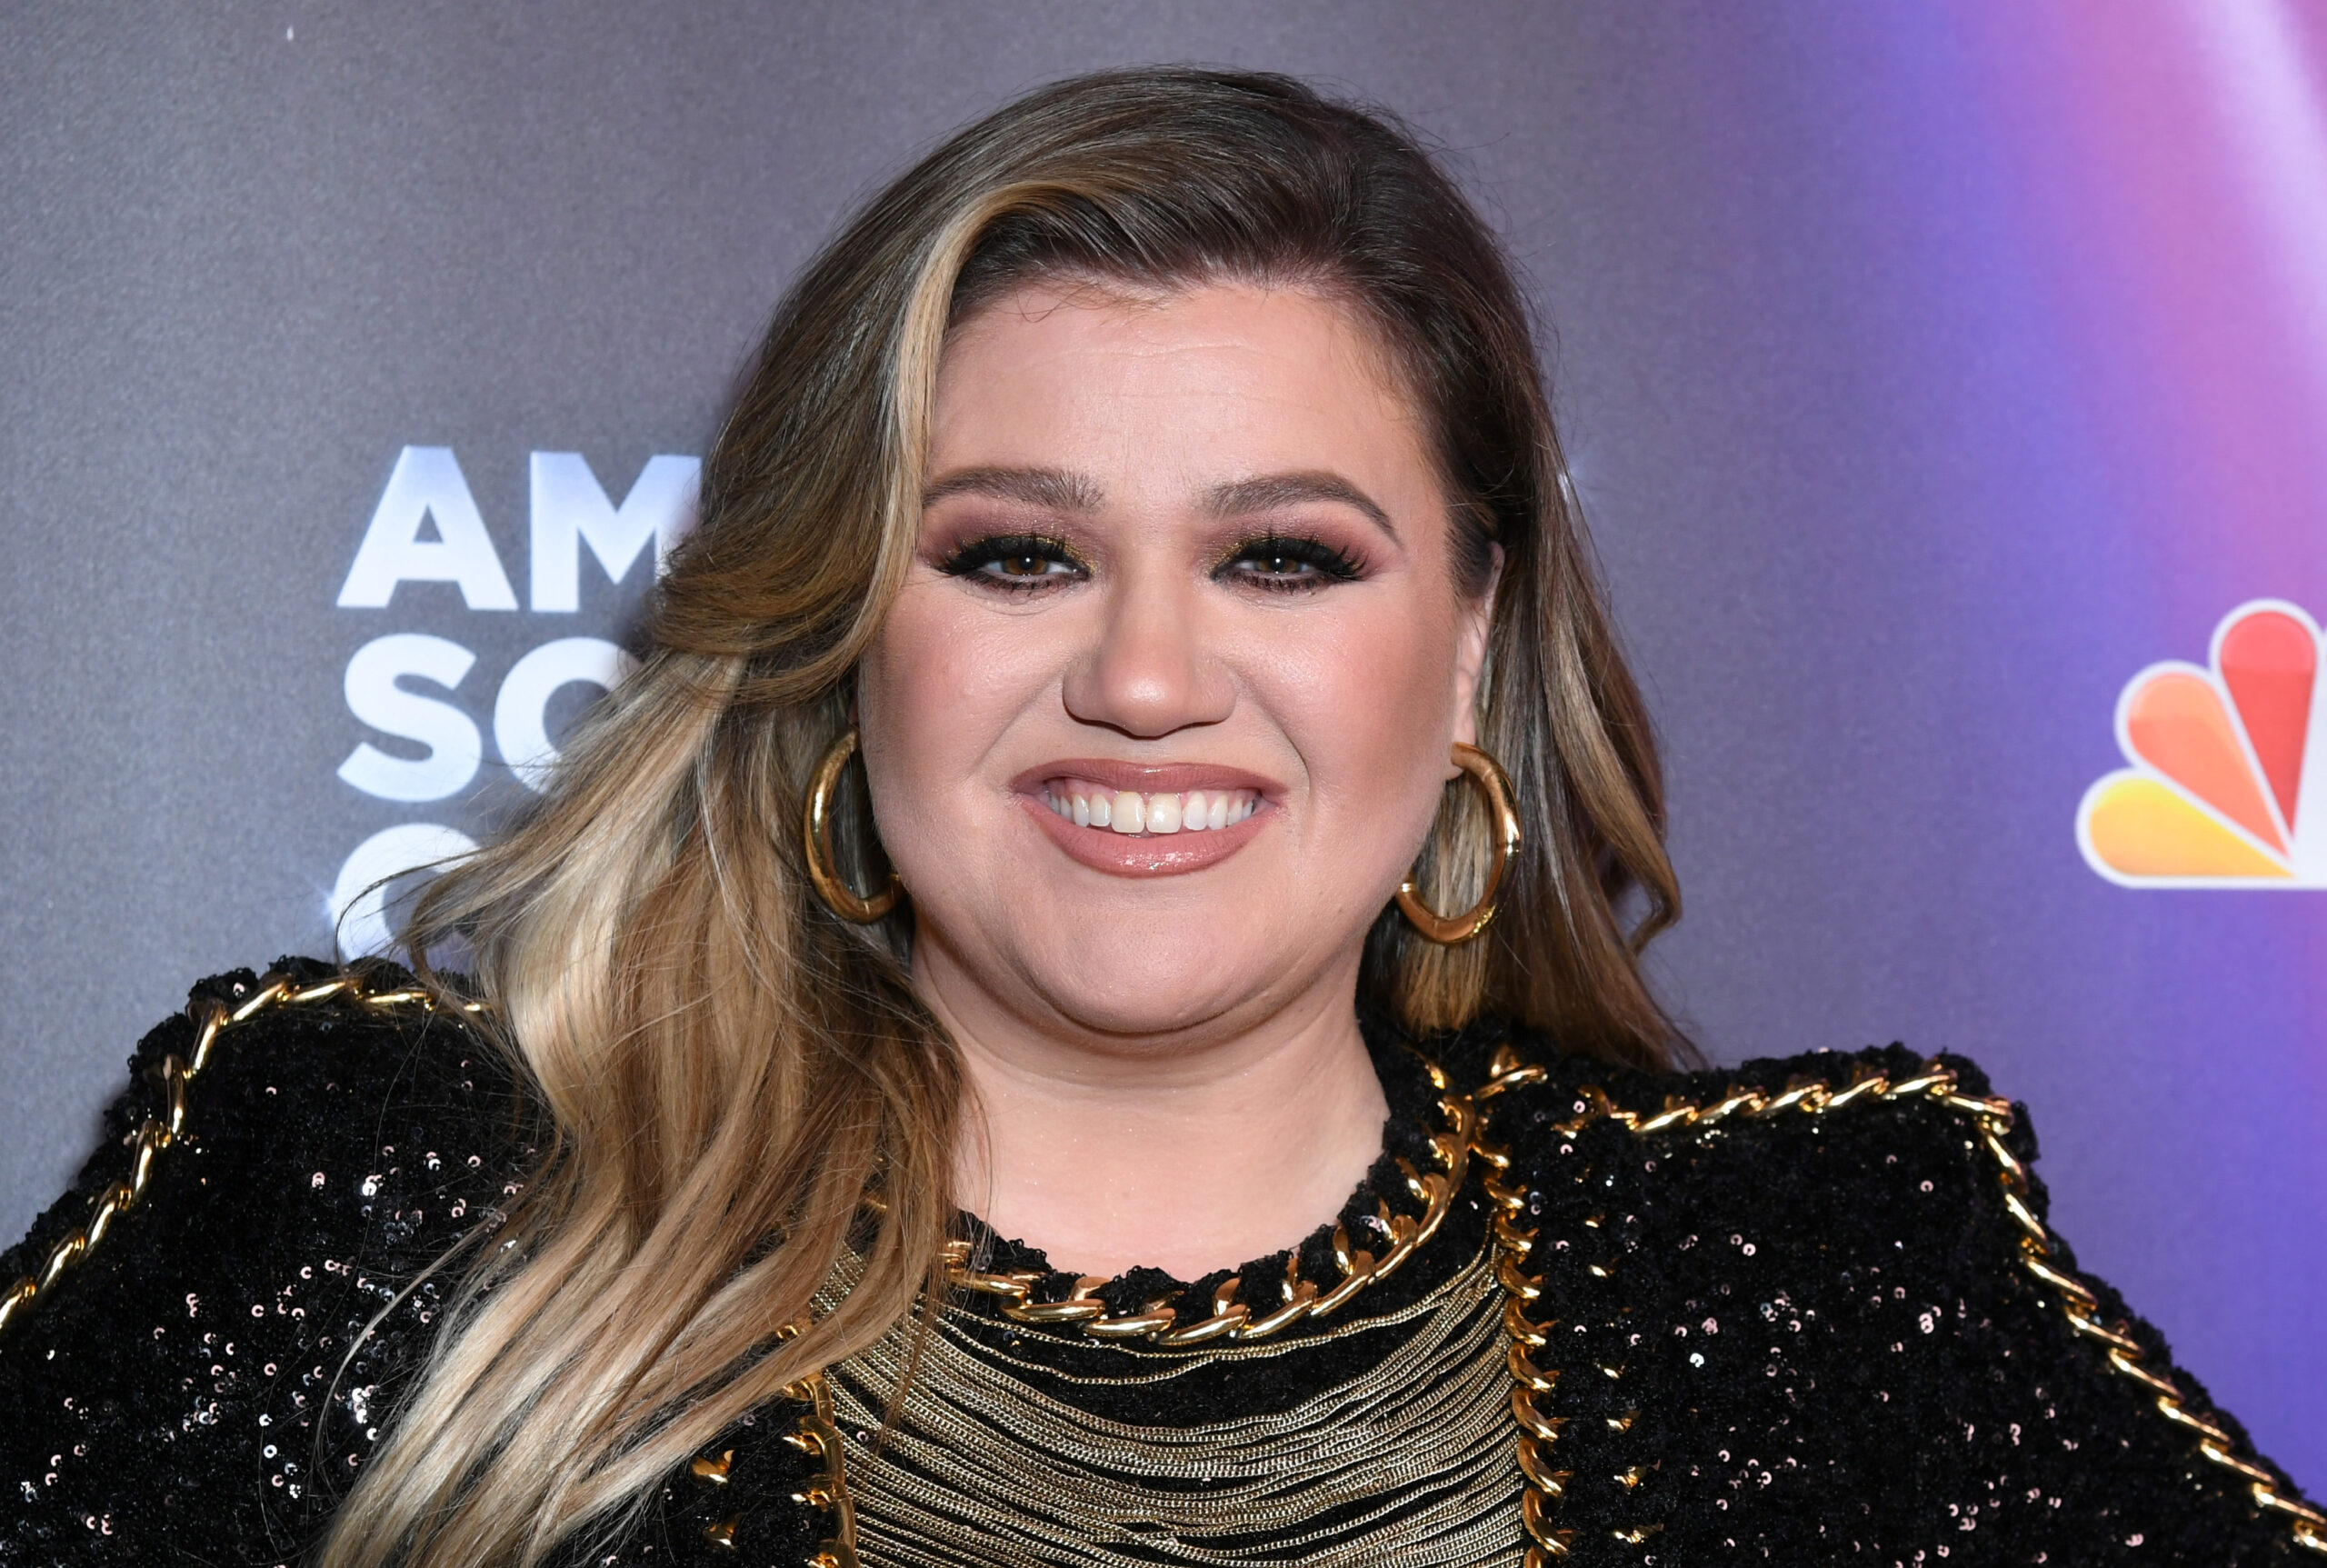 Kelly Clarkson addresses toxic work environment allegations on her talk show.